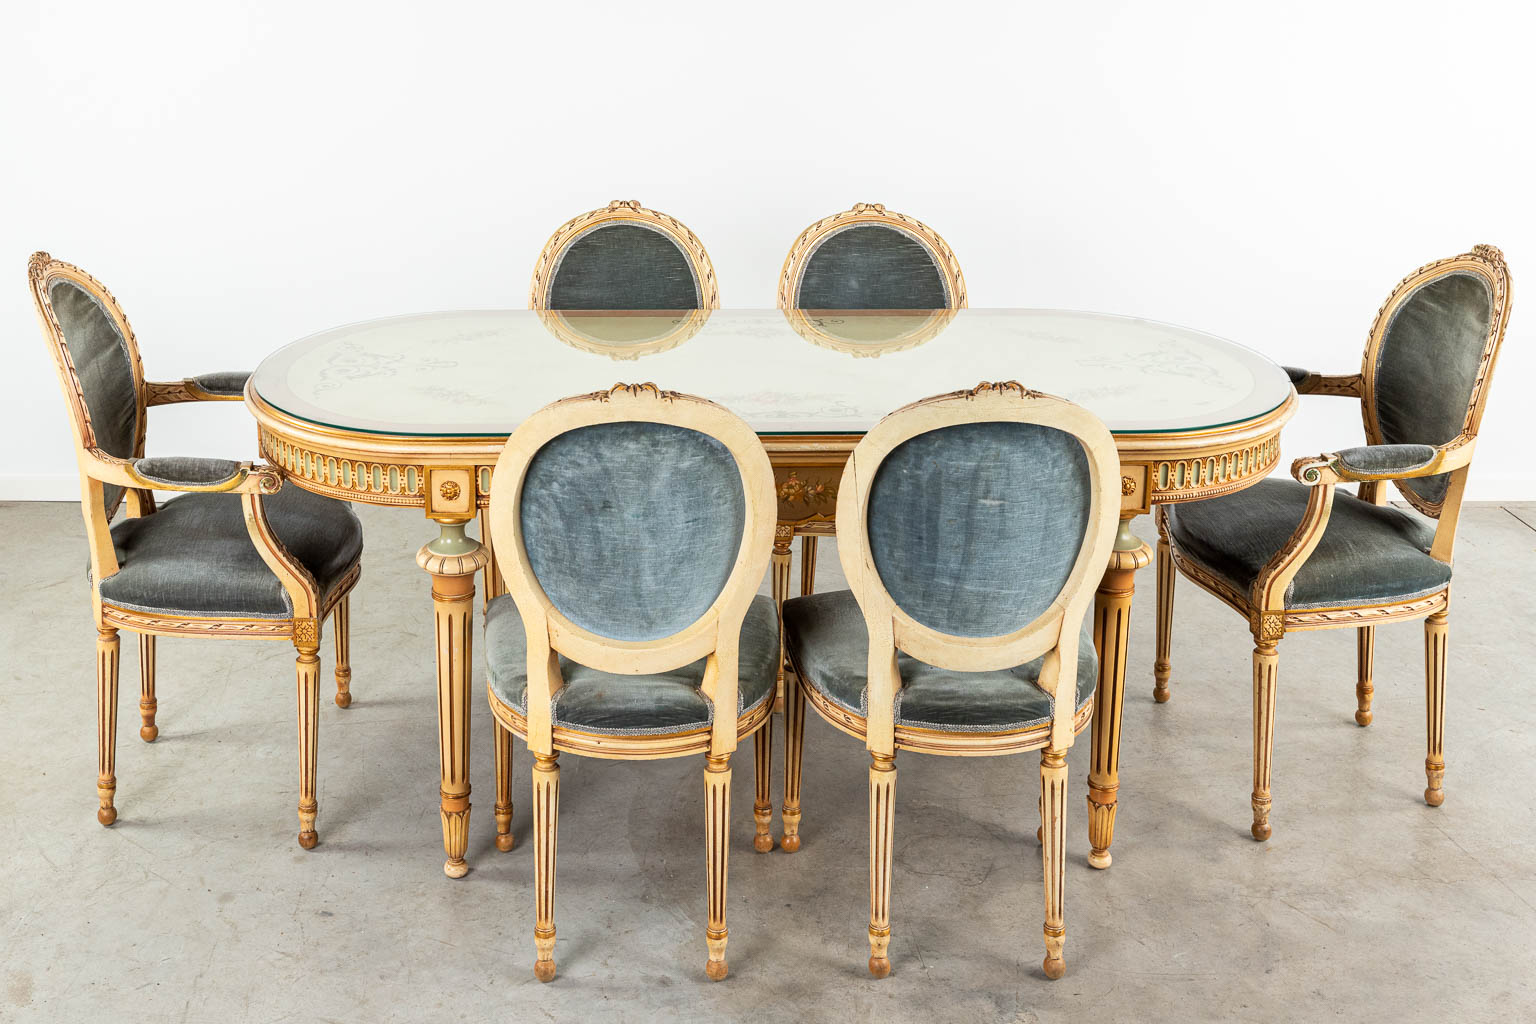 A table and 6 chairs made in Italian style of patinated wood. (H:82cm)